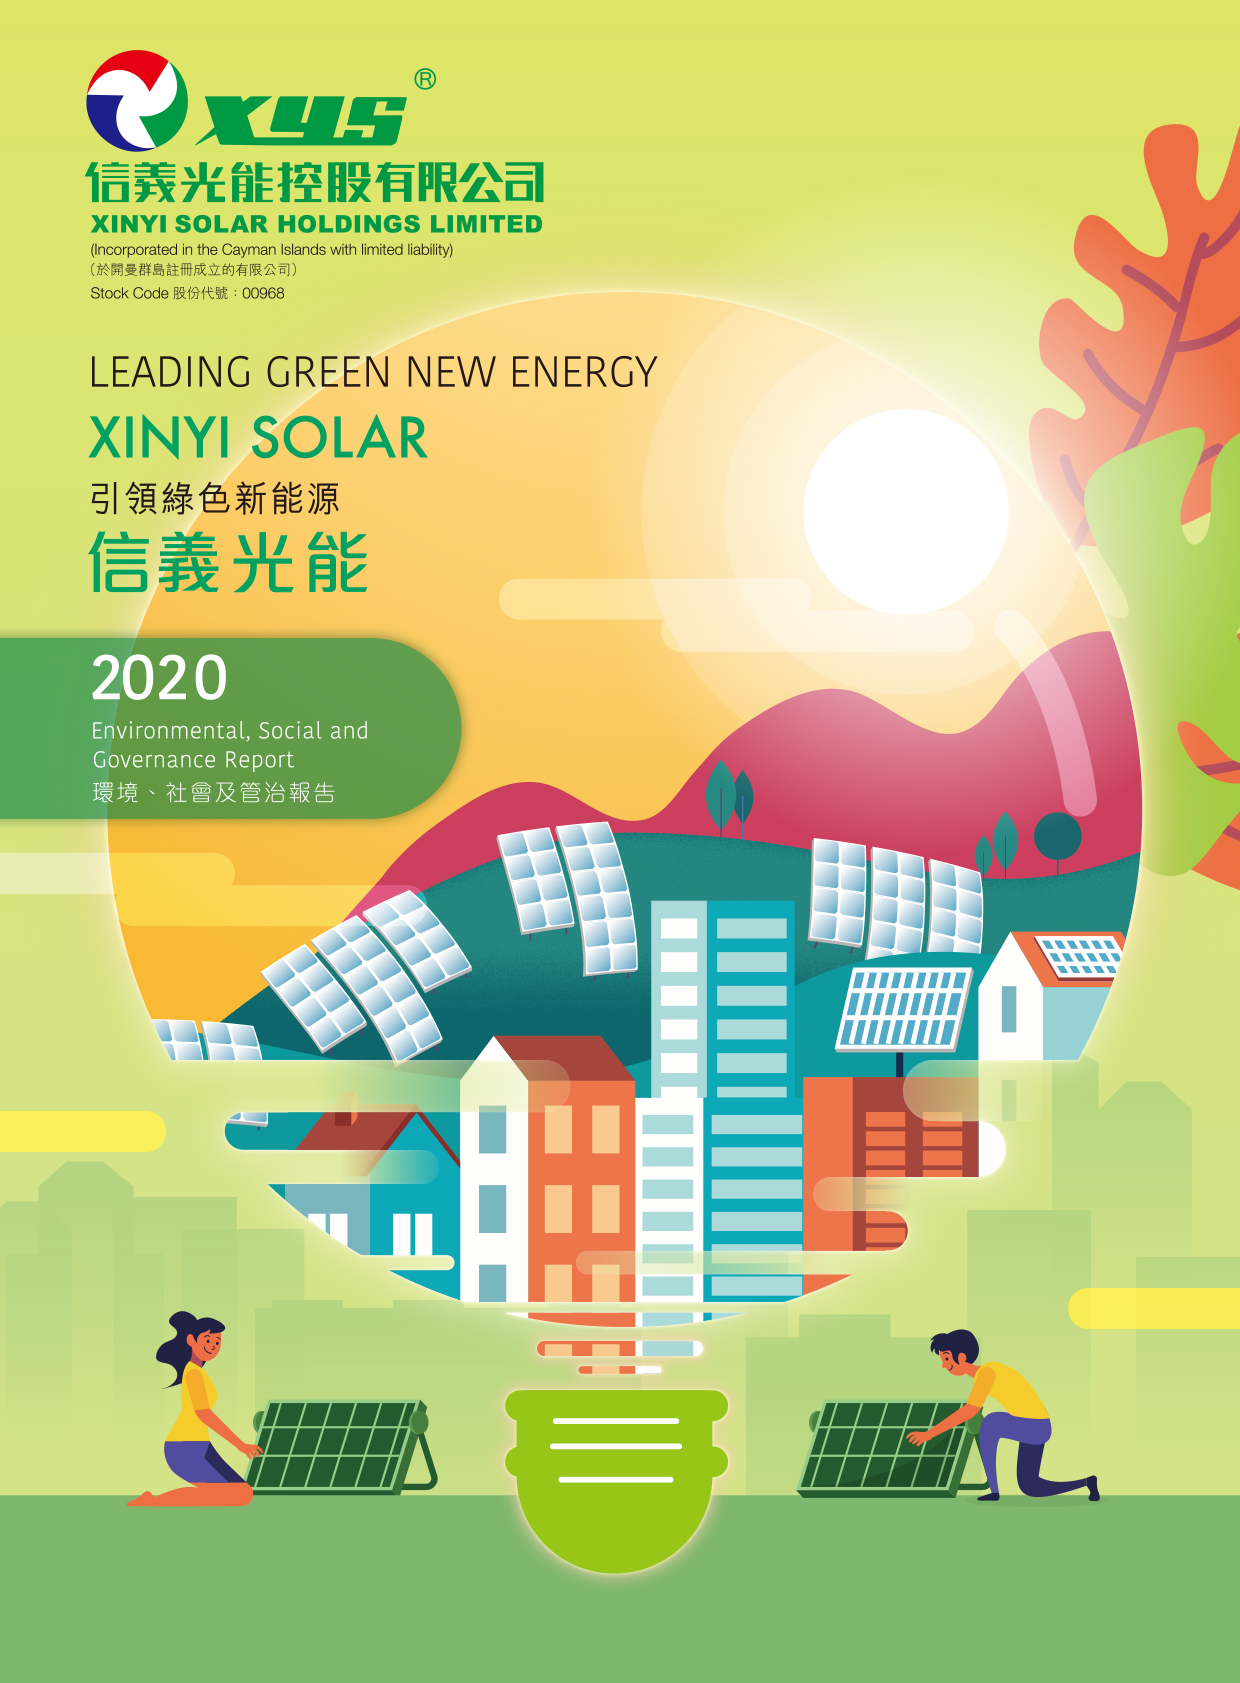 Xinyi Solar Holdings Limited